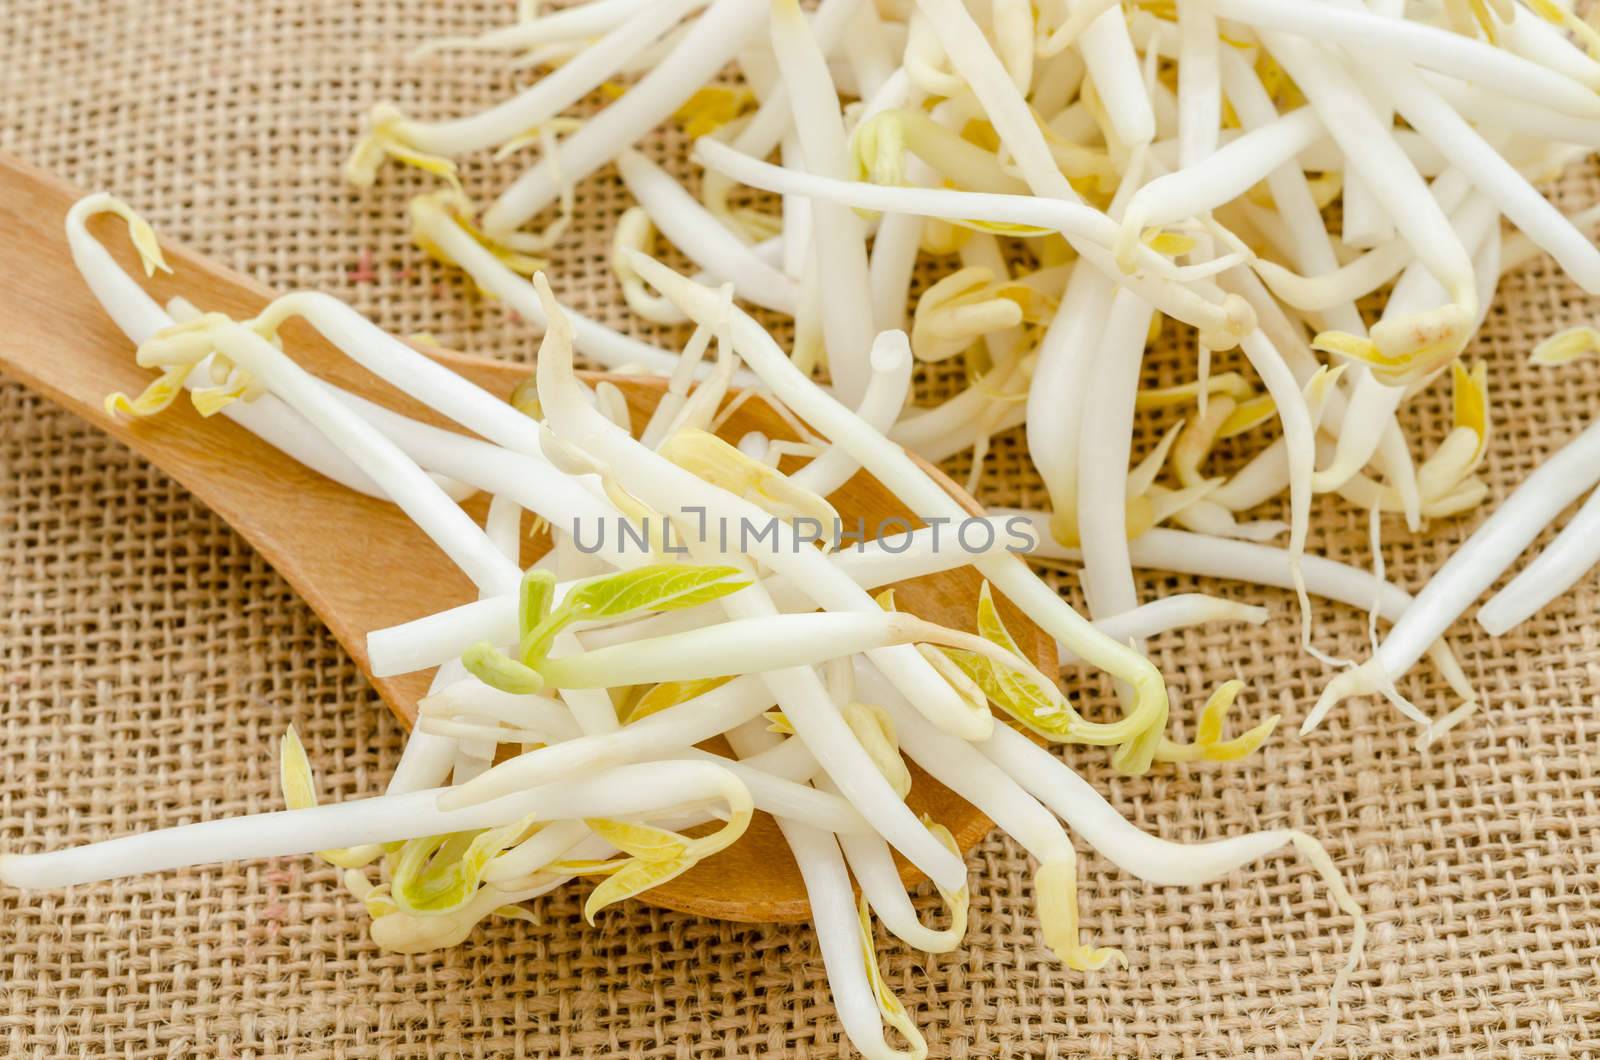 Mung beans or bean sprouts on sack background.